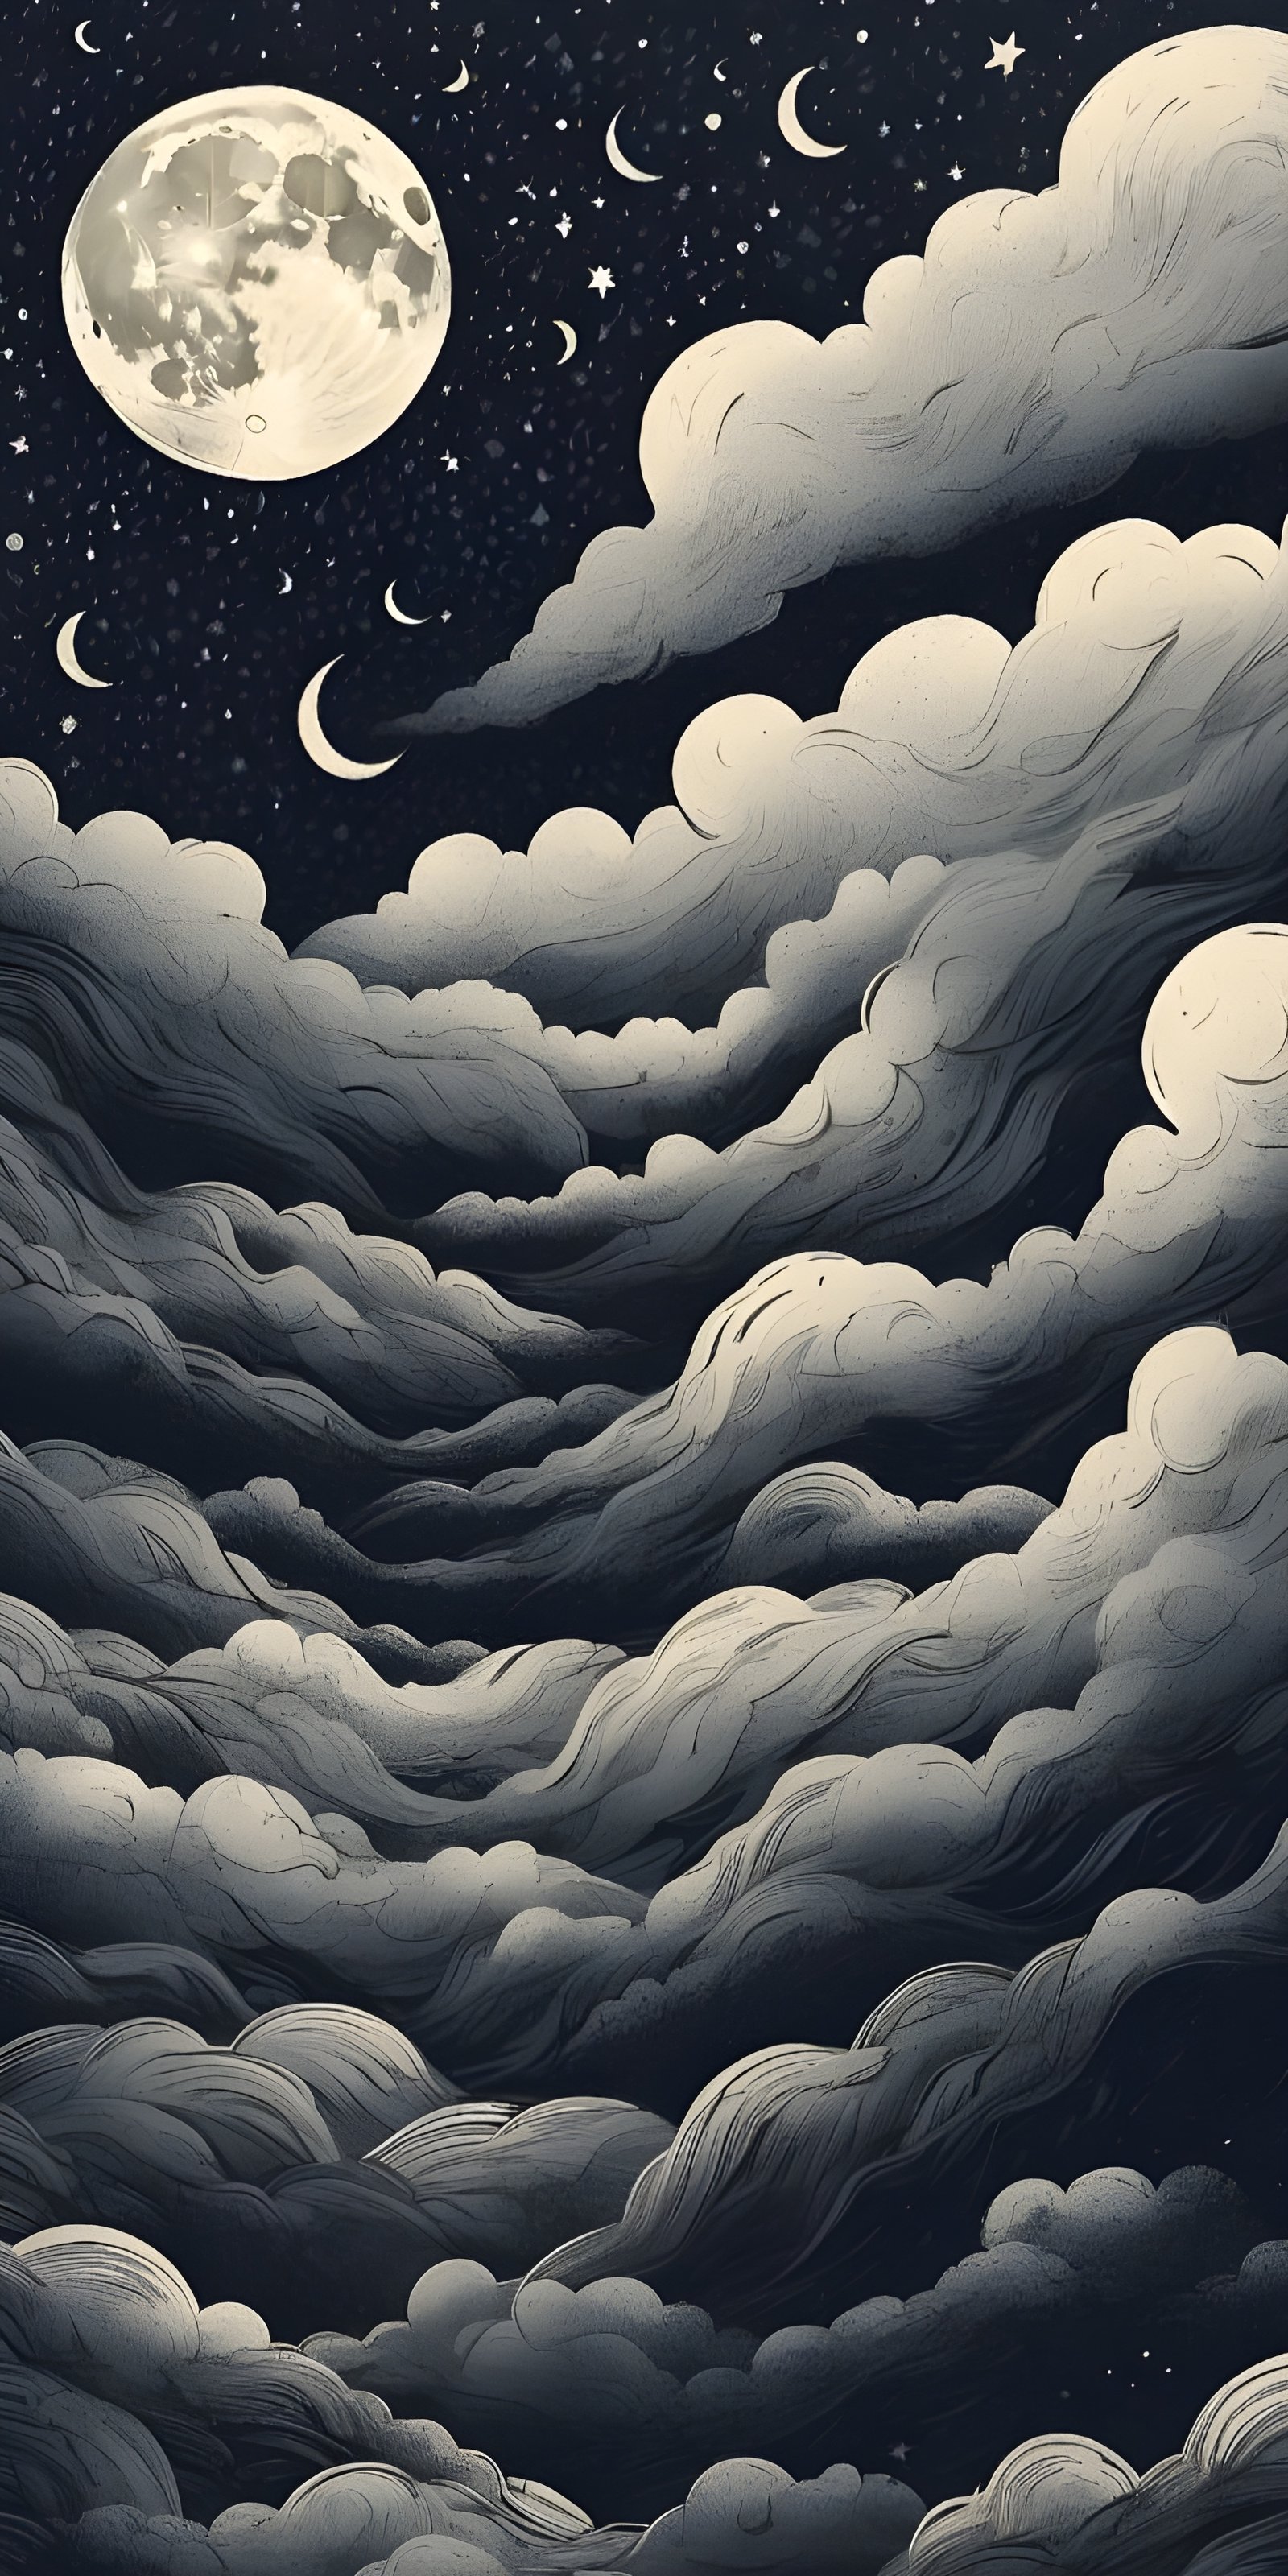 Night Wallpaper for Mobile, Moon, Black and White, Clouds